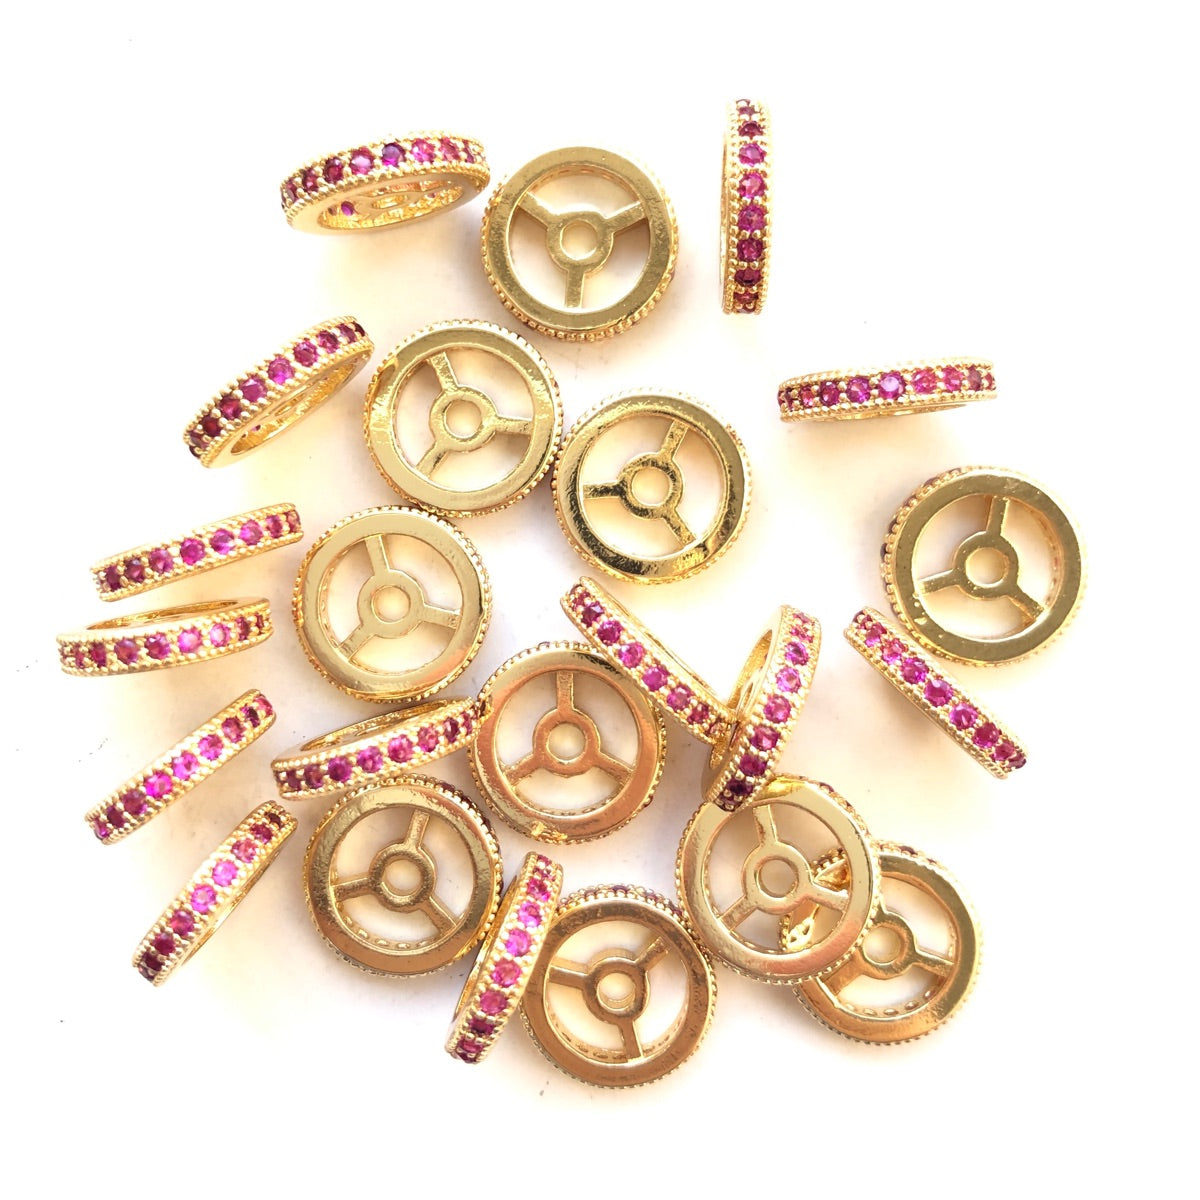 20pcs/lot 9.6/12mm Fuchsia CZ Paved Wheel Rondelle Spacers Gold CZ Paved Spacers New Spacers Arrivals Rondelle Beads Charms Beads Beyond